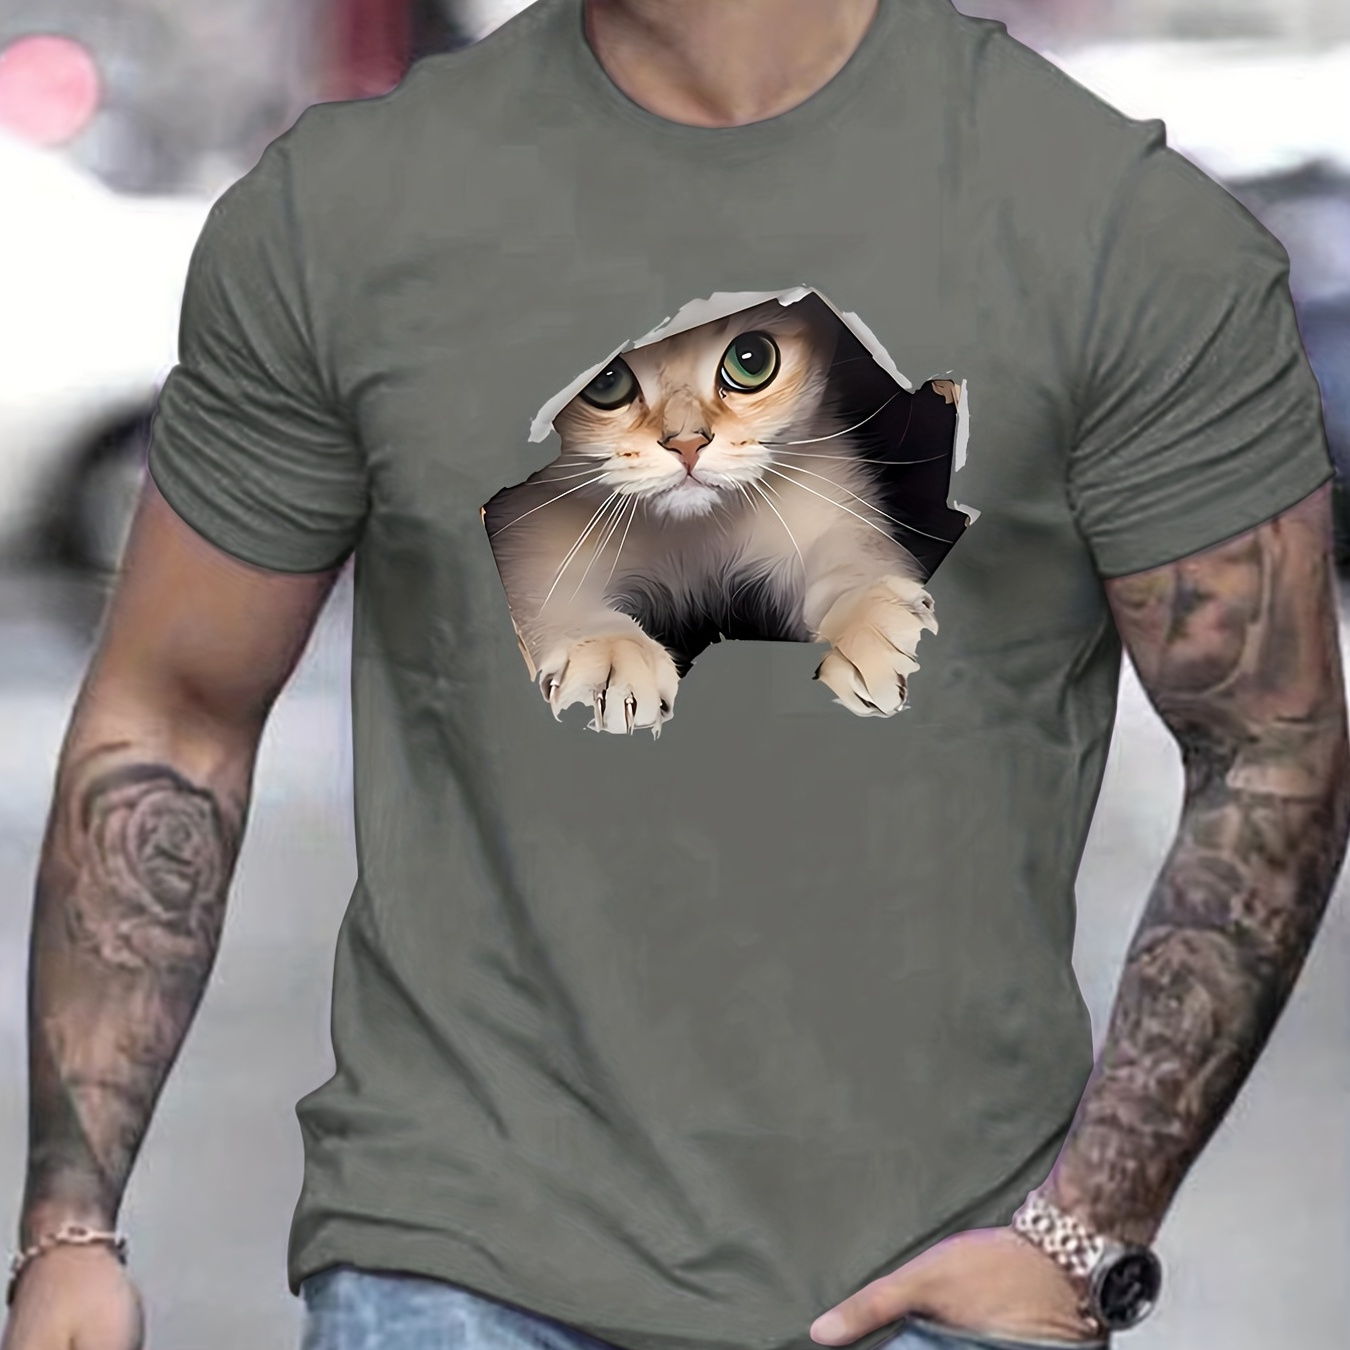 

Cute Cat Graphic Print Men's Creative Top, Casual Slightly Stretch Short Sleeve Crew Neck T-shirt, Men's Tee For Summer Outdoor